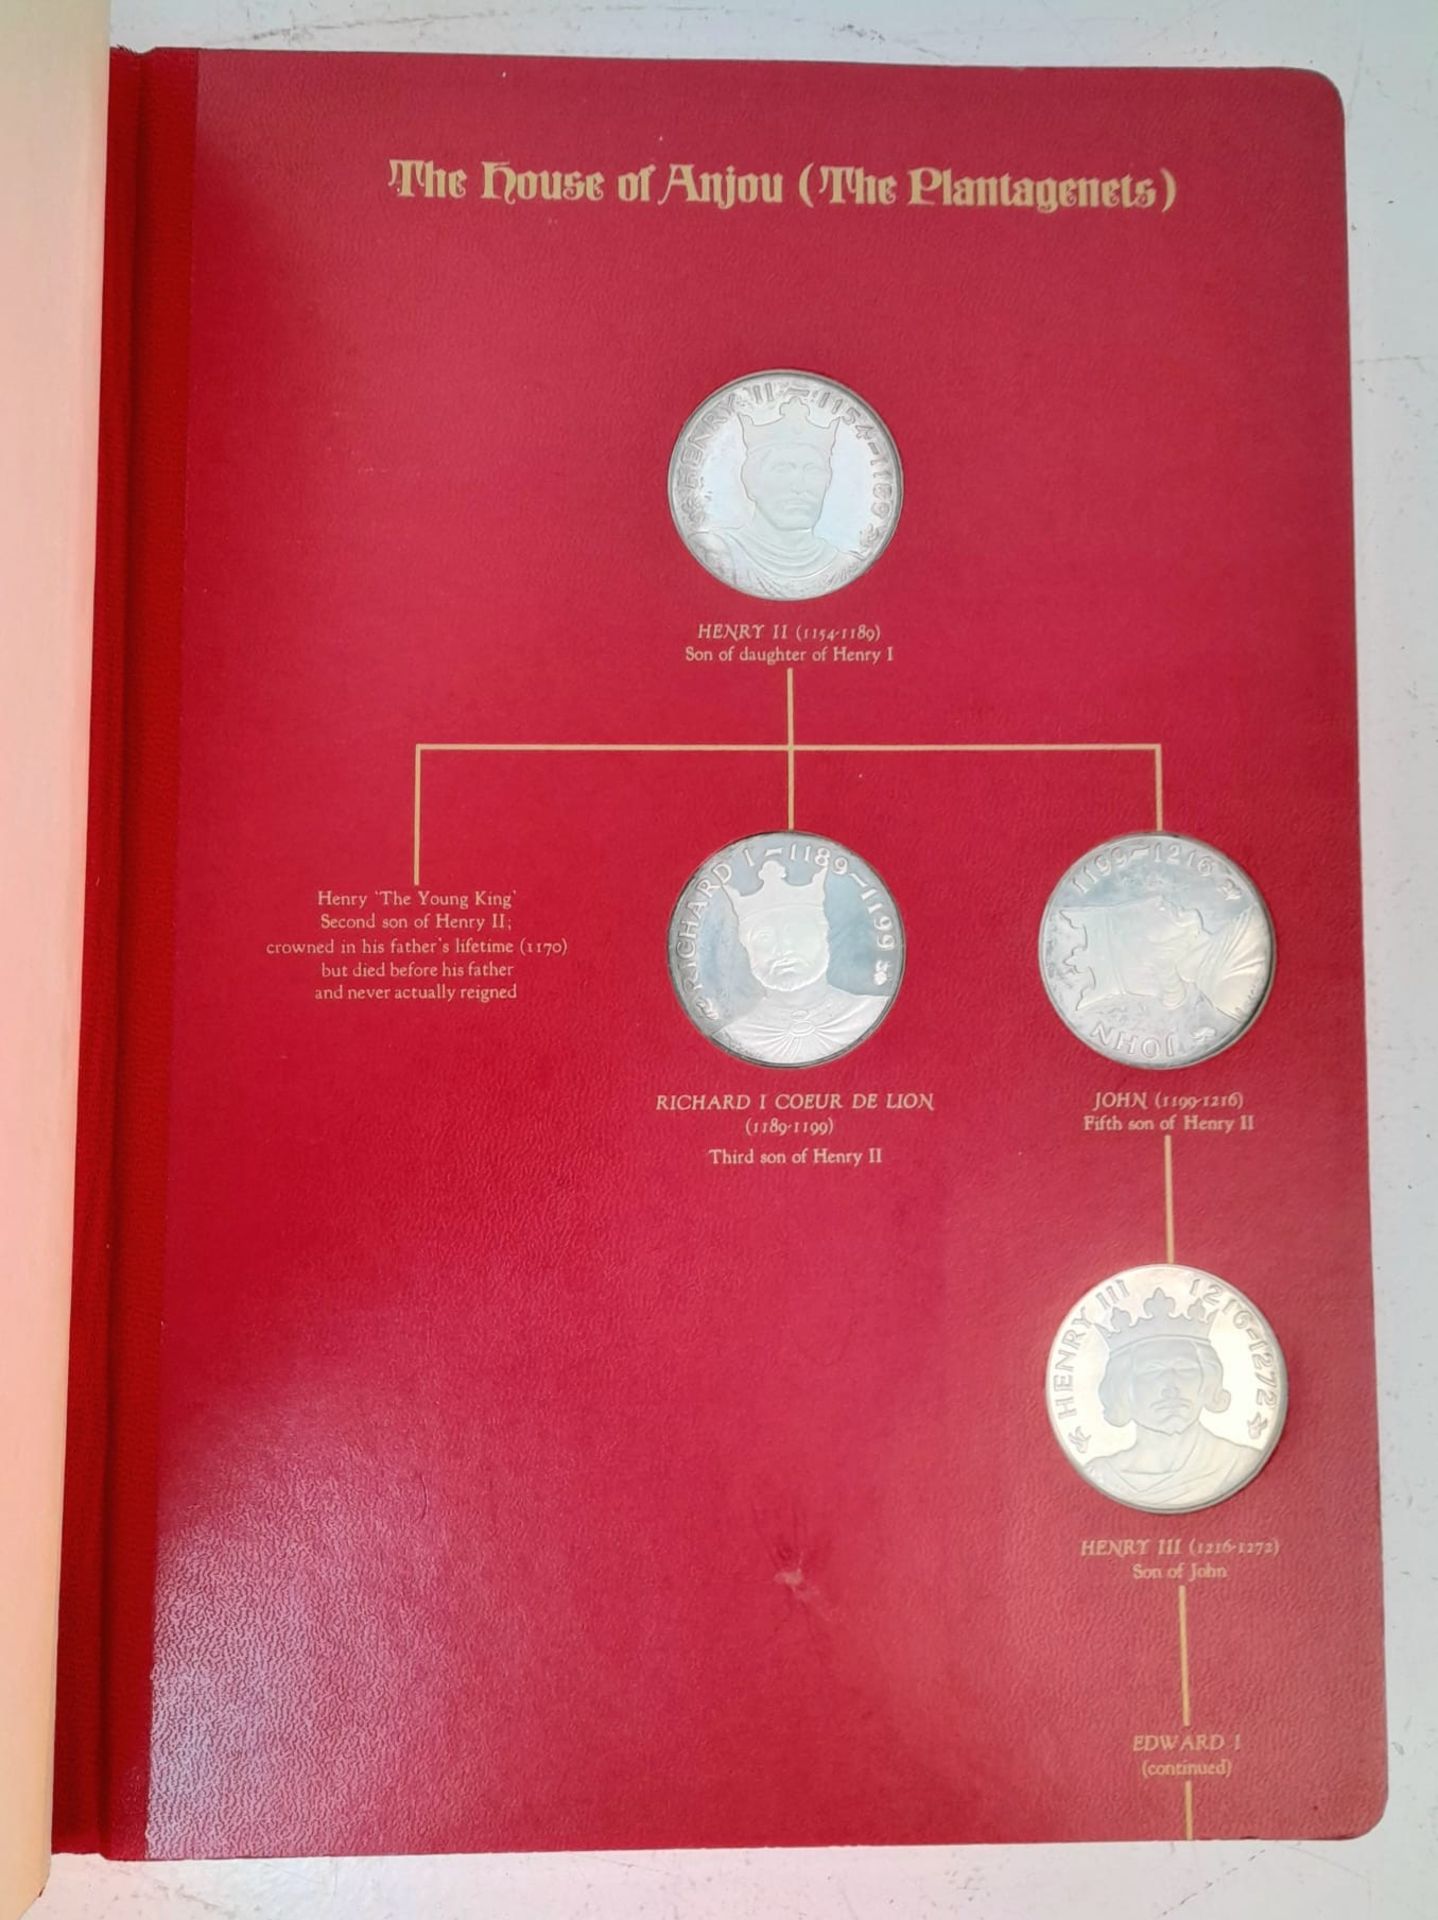 The Kings and Queens of England. First edition sterling silver proof medal set. 43 monarchs in - Image 8 of 8